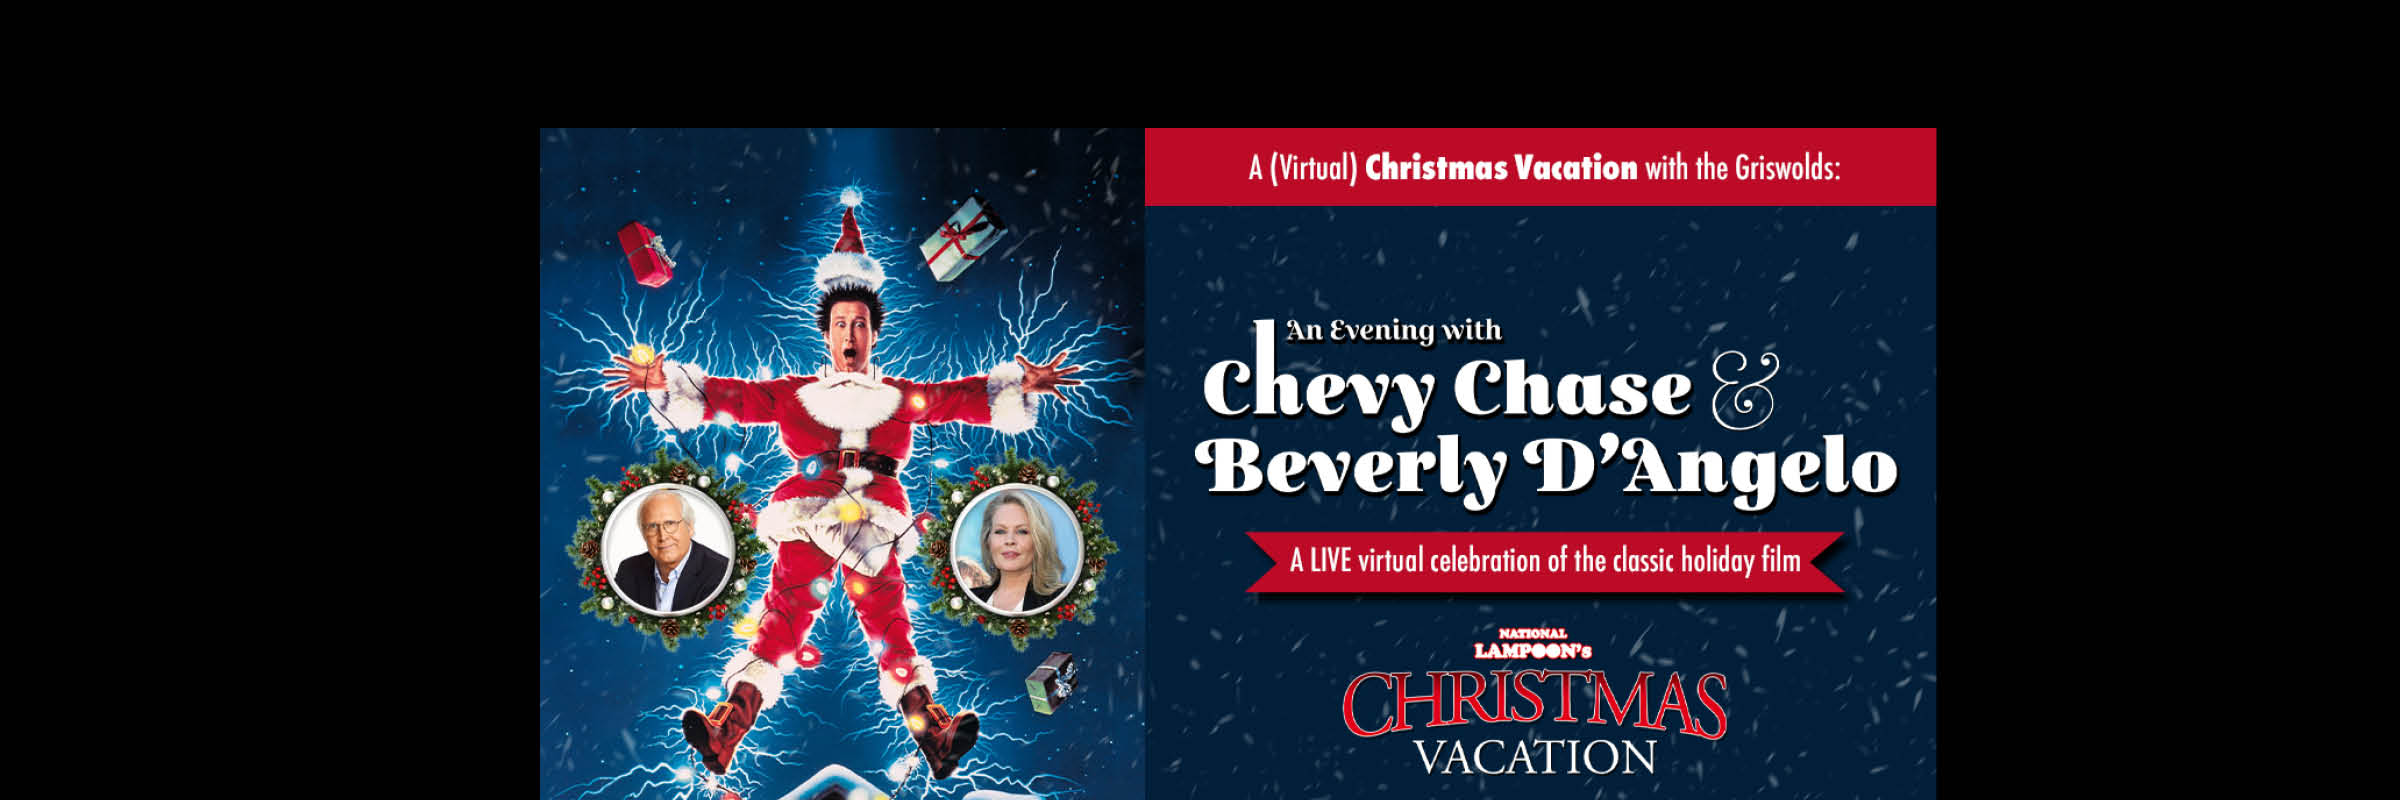 An (Virtual) Evening with Chevy Chase & Beverly D'Angelo